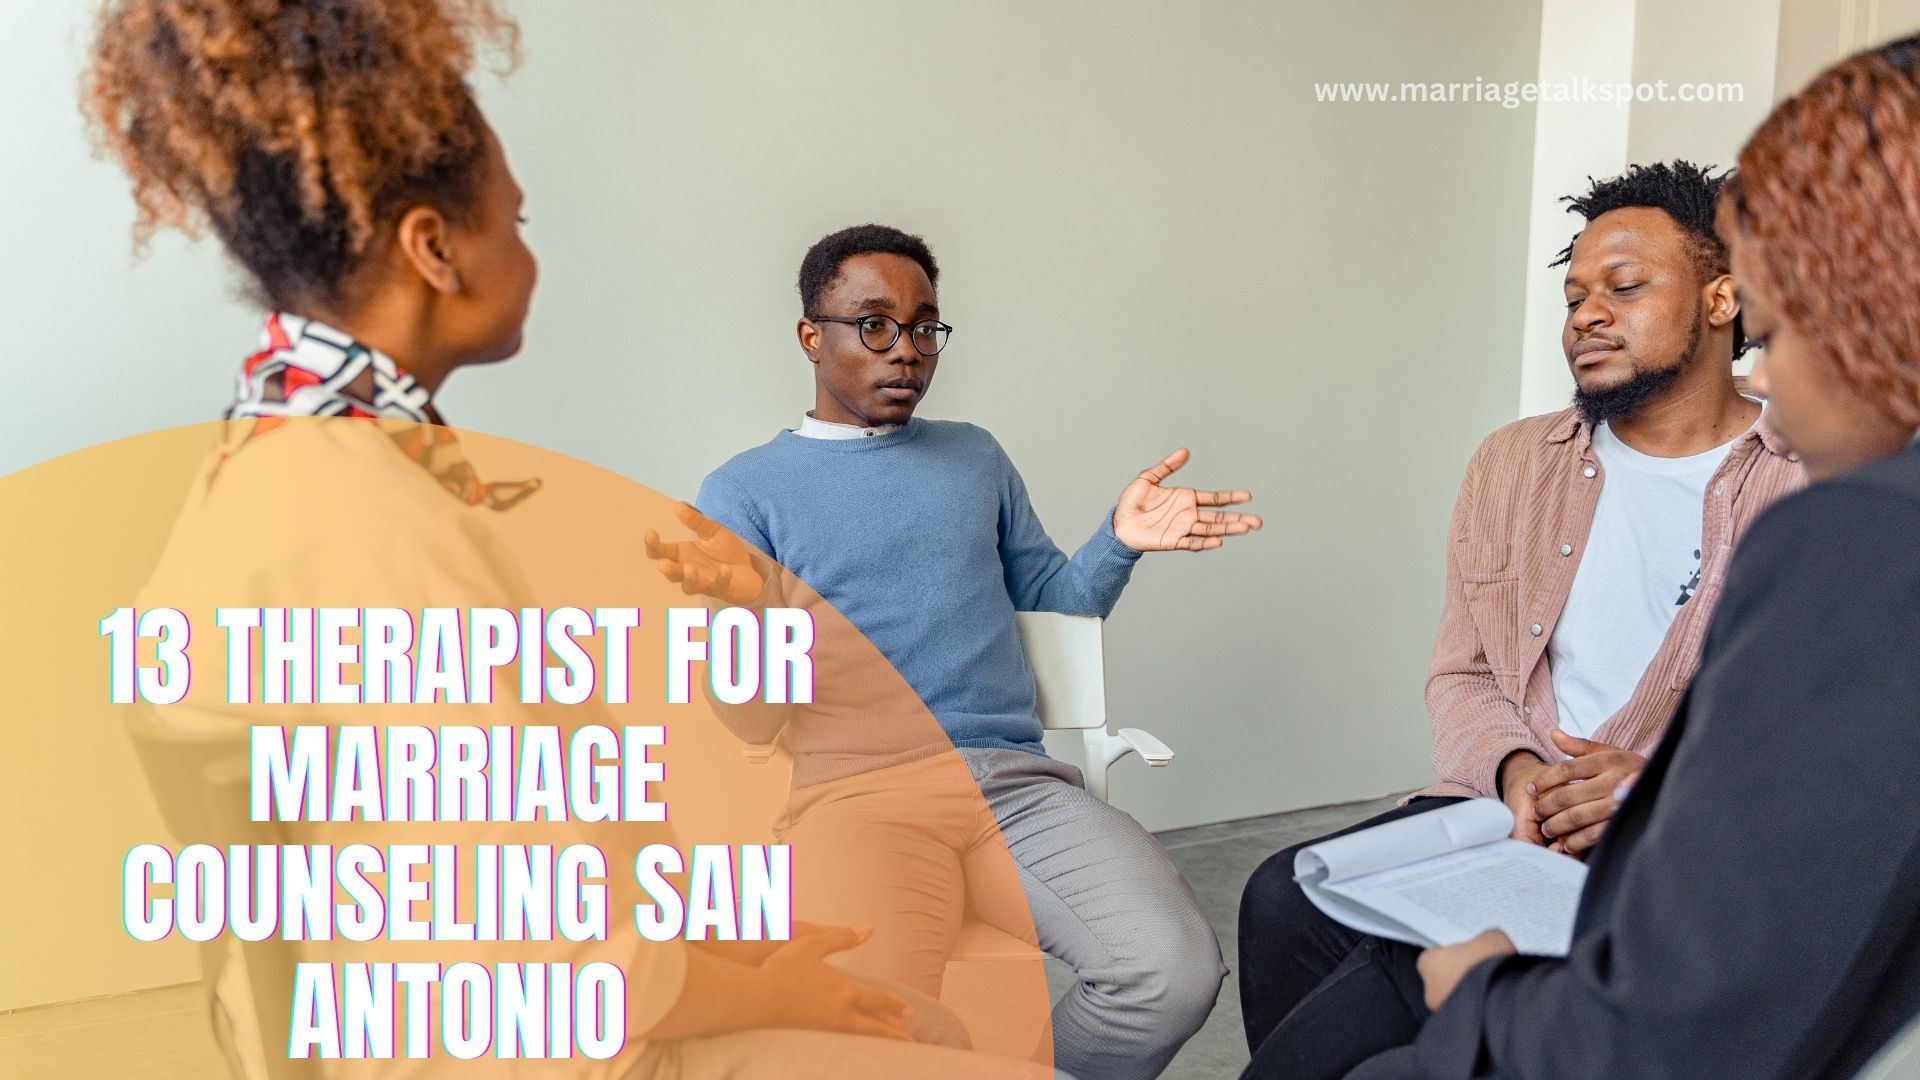 13 Therapist For Marriage Counseling San Antonio